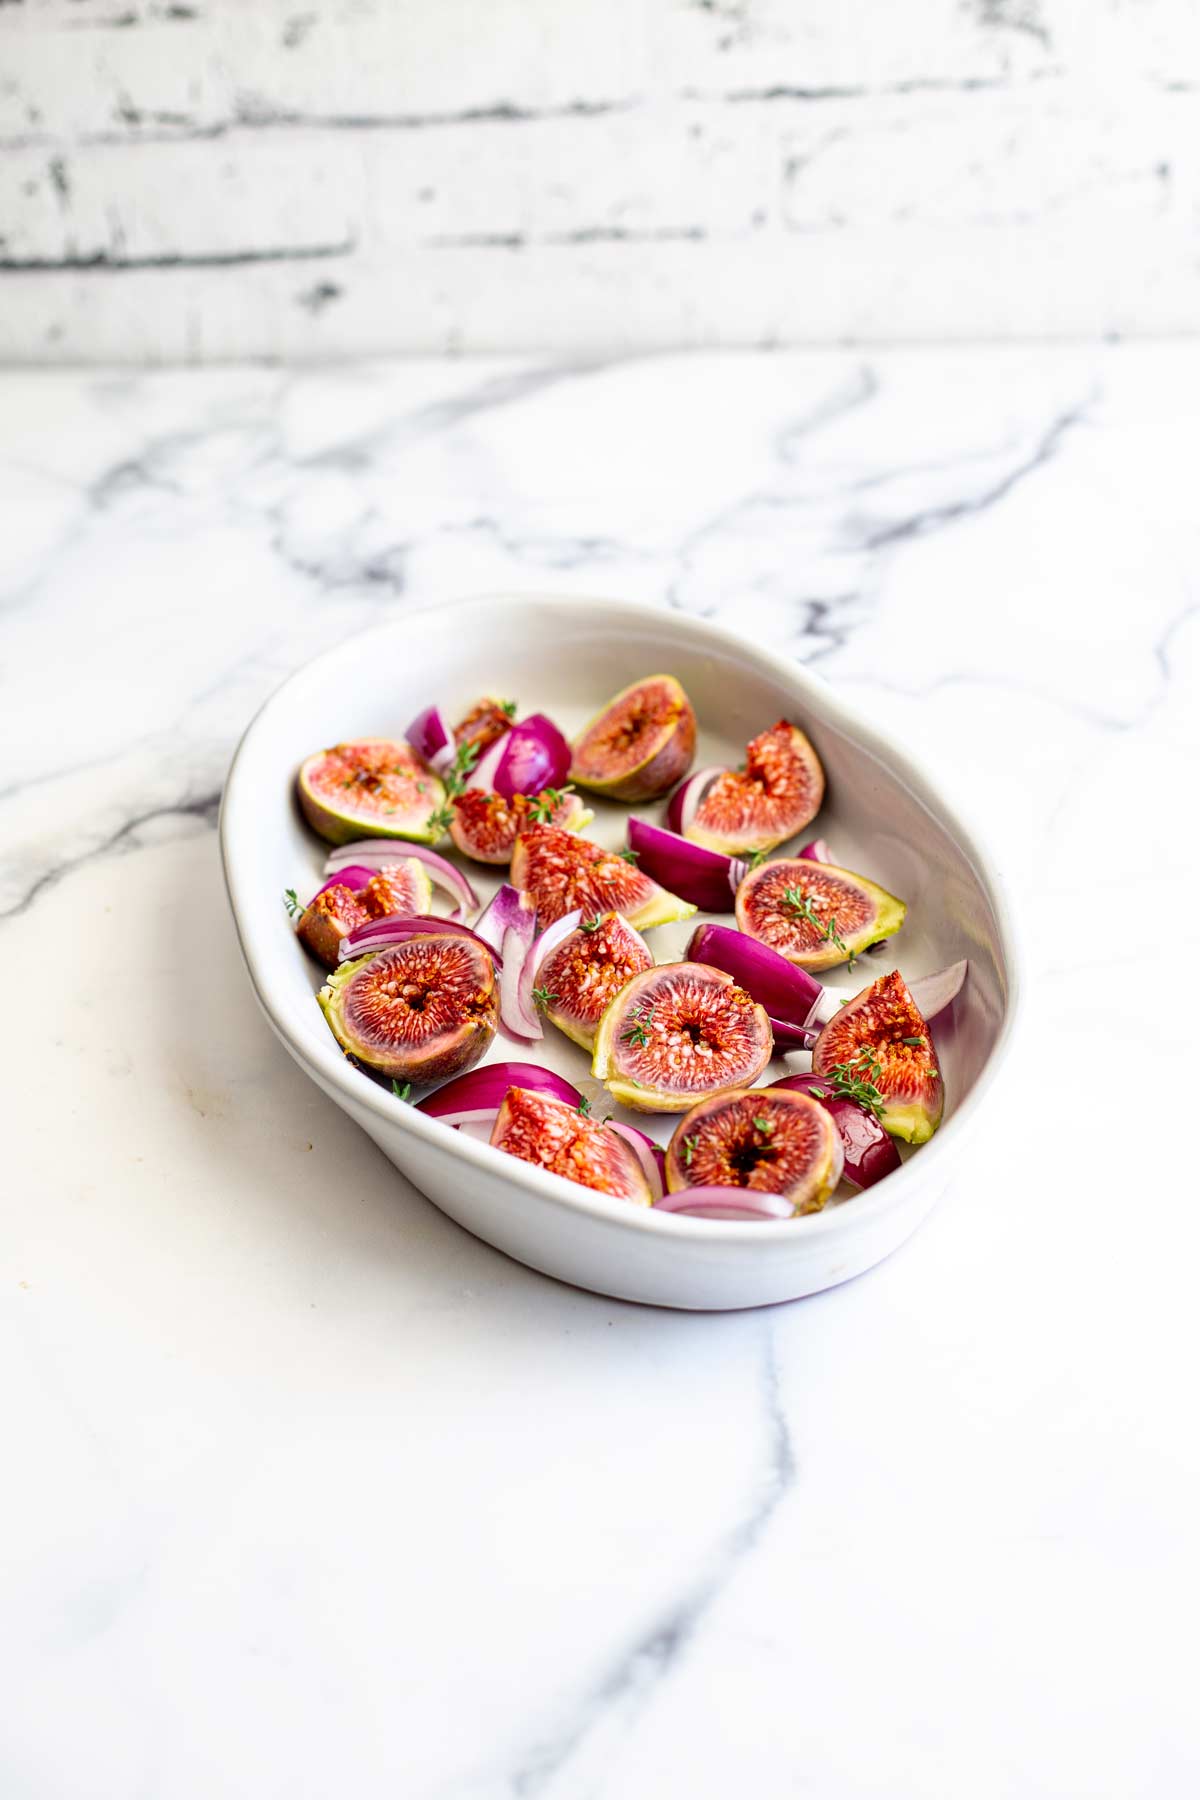 a white oval dish filled with fresh figs halves and red onion slices